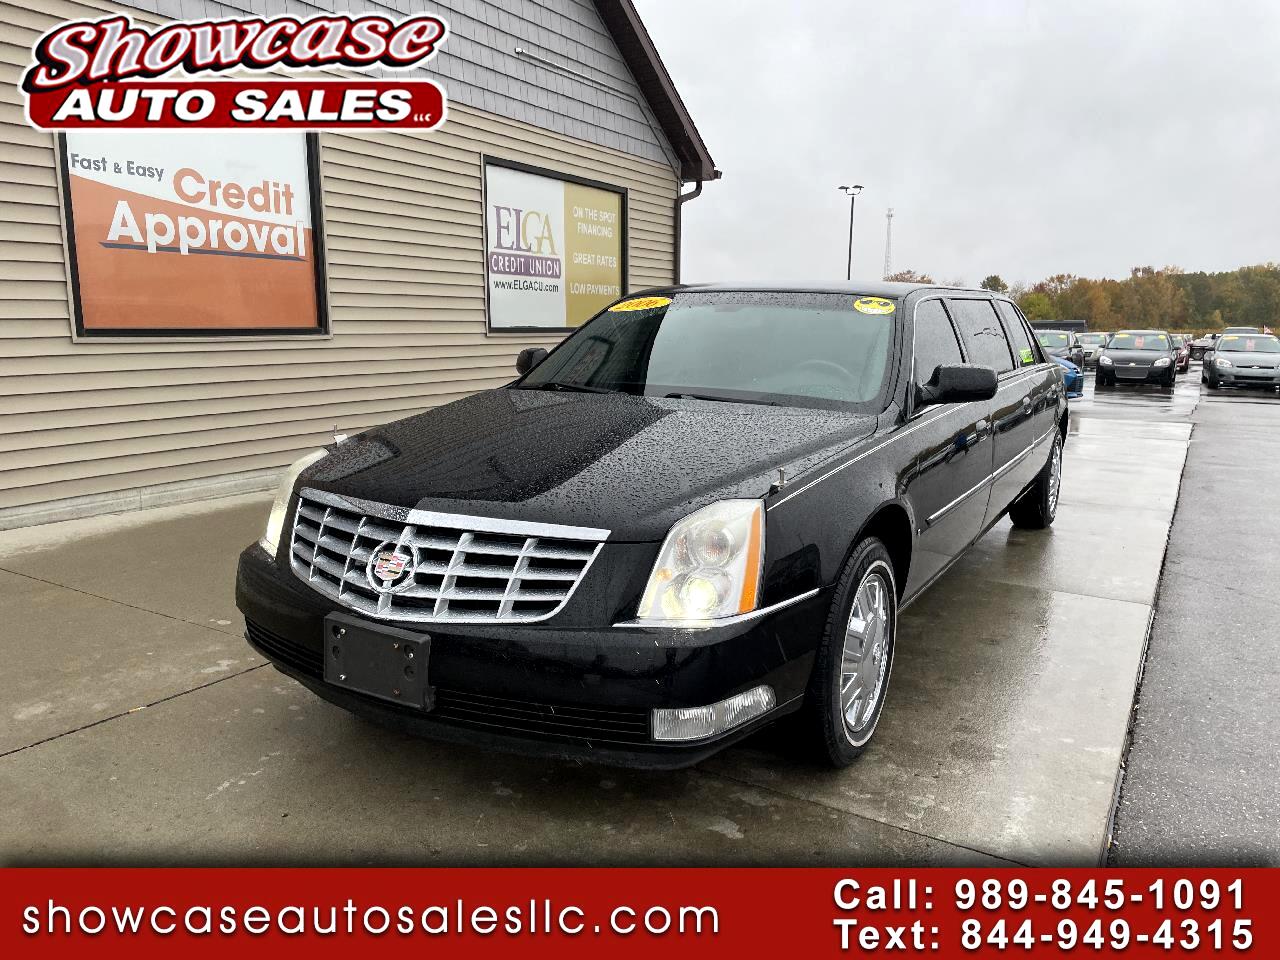 Cadillac DTS Professional 4dr Sdn Limousine 2006